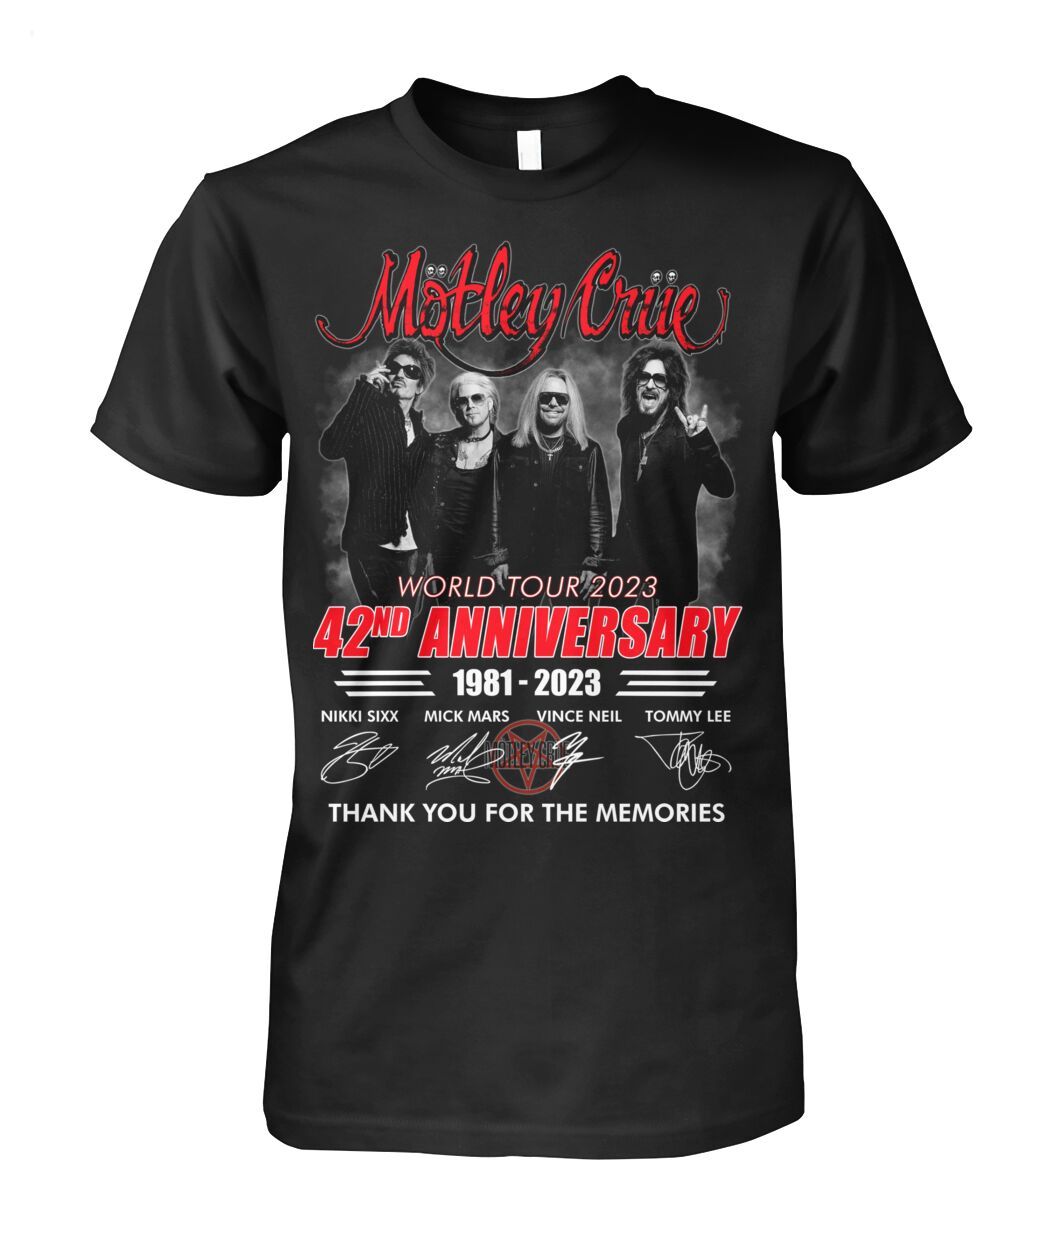 LIMITED EDITION Motley Crue World Tour 2023 42nd Anniversary